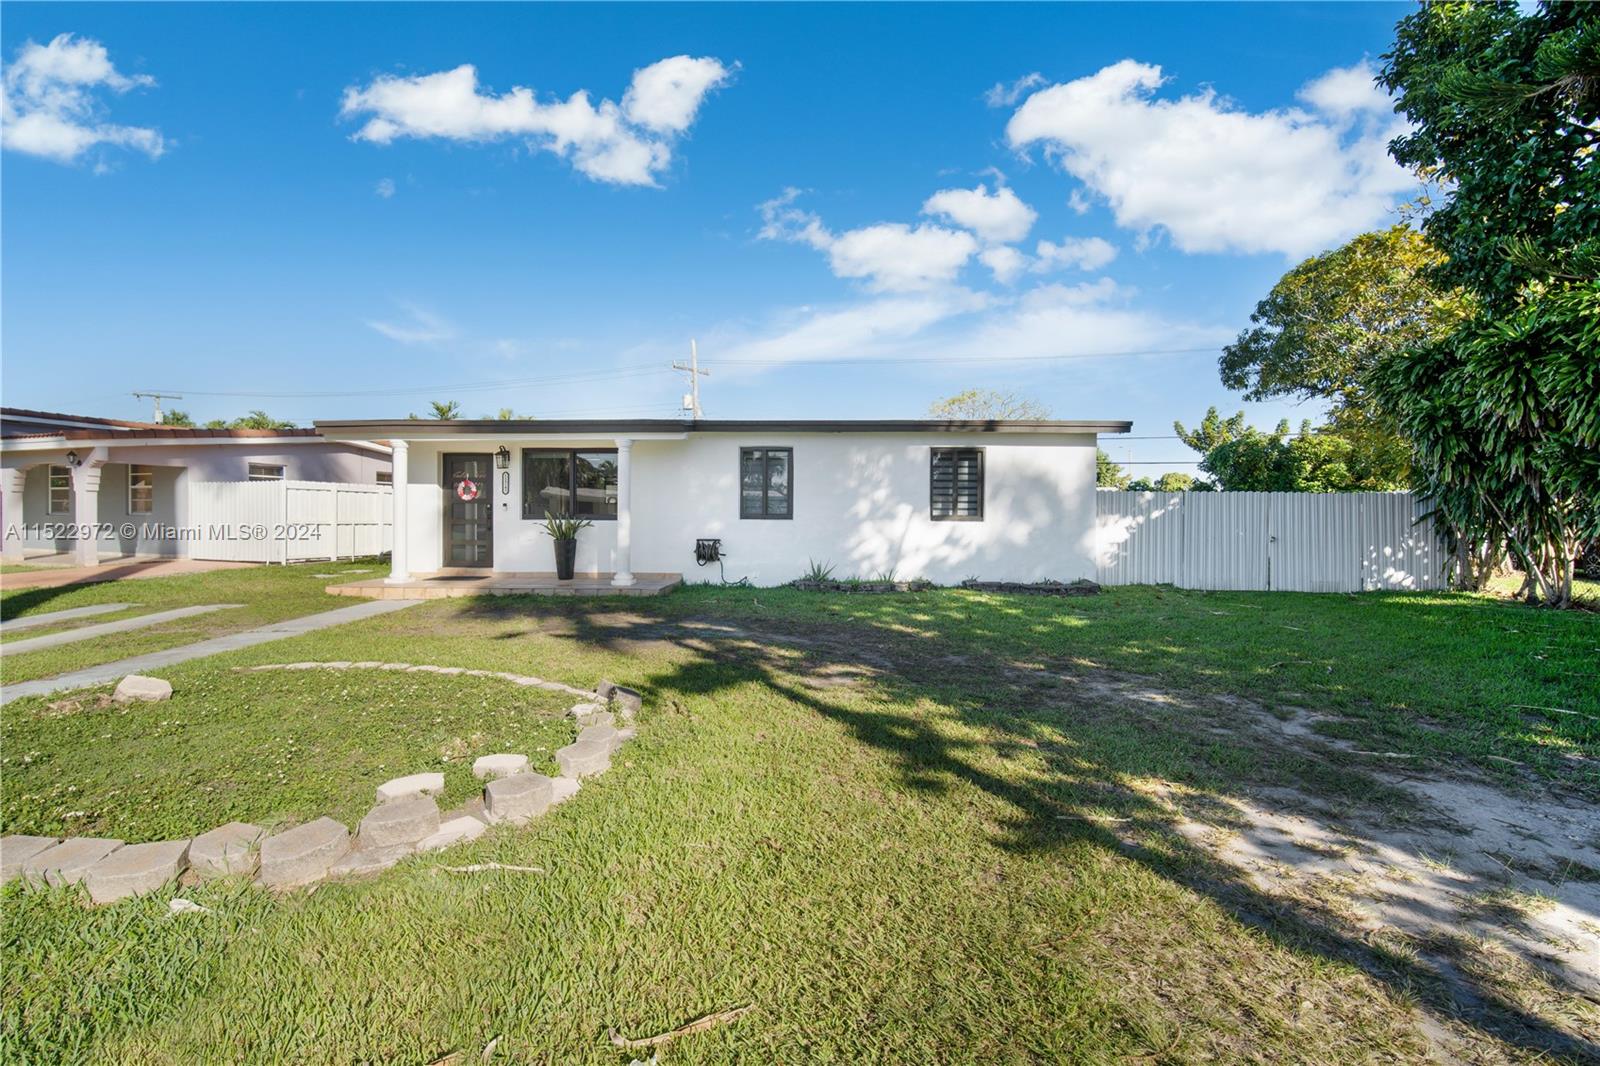 11245 SW 47th Ter, Miami, Florida 33165, 4 Bedrooms Bedrooms, ,3 BathroomsBathrooms,Residential,For Sale,11245 SW 47th Ter,A11522972